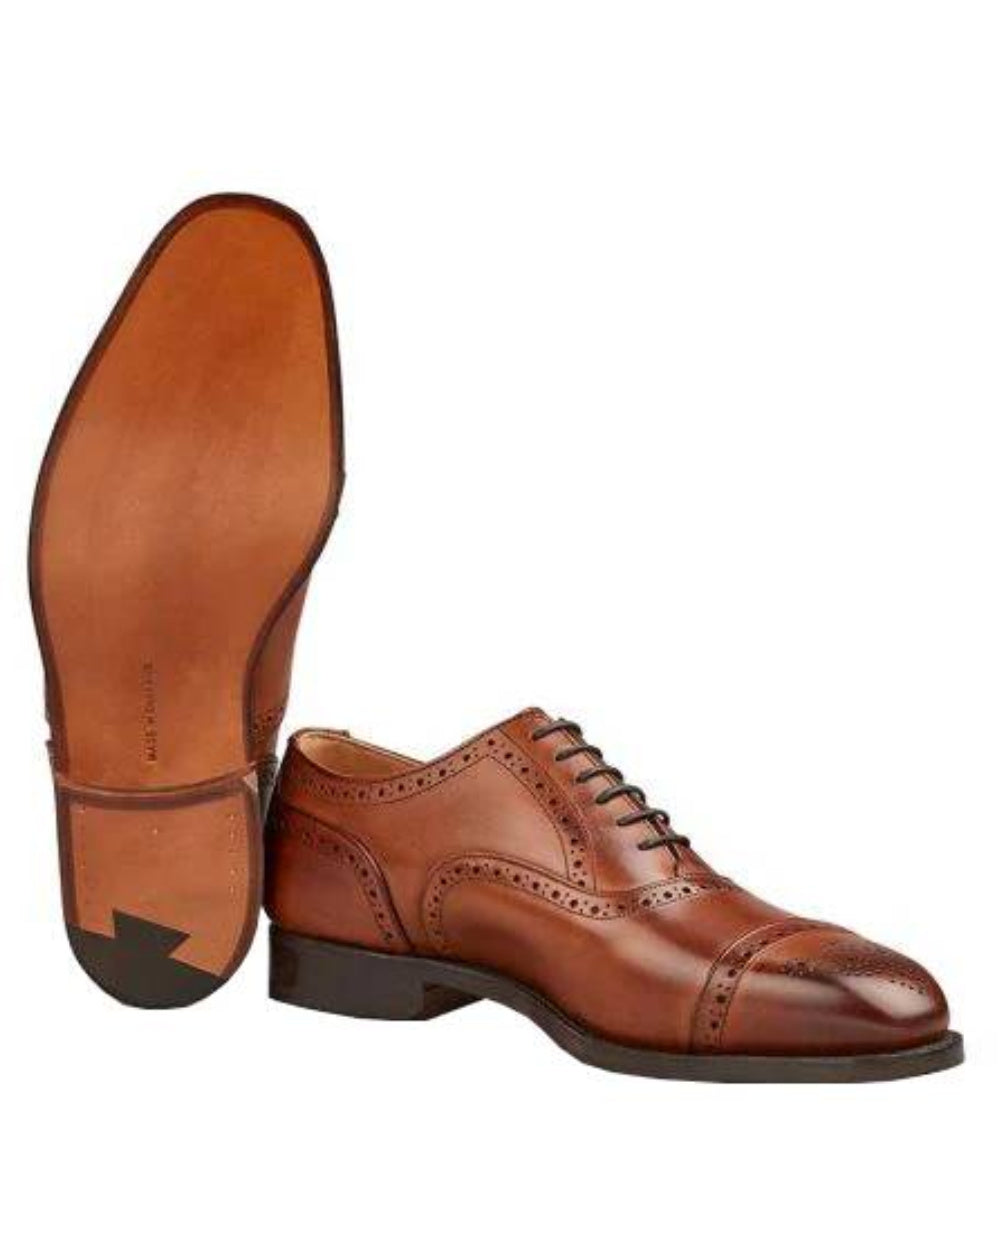 Beechnut Burnished Coloured Trickers Kensington Leather Sole Toecap Oxford City Shoe On A White Background 